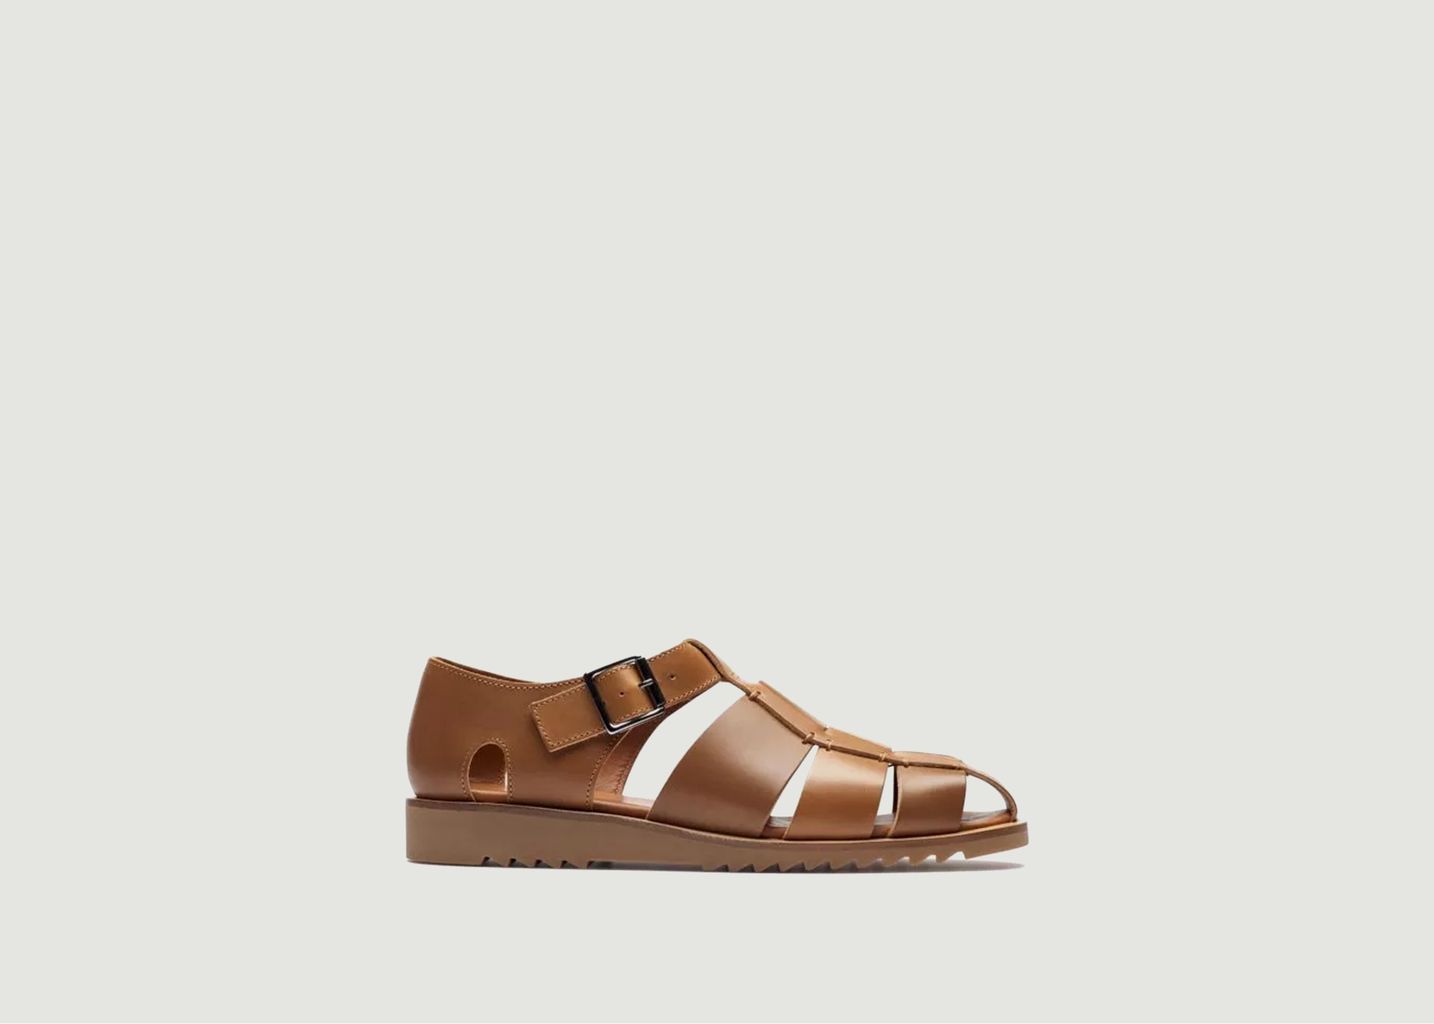 Paraboot Pacific Leather Sandals